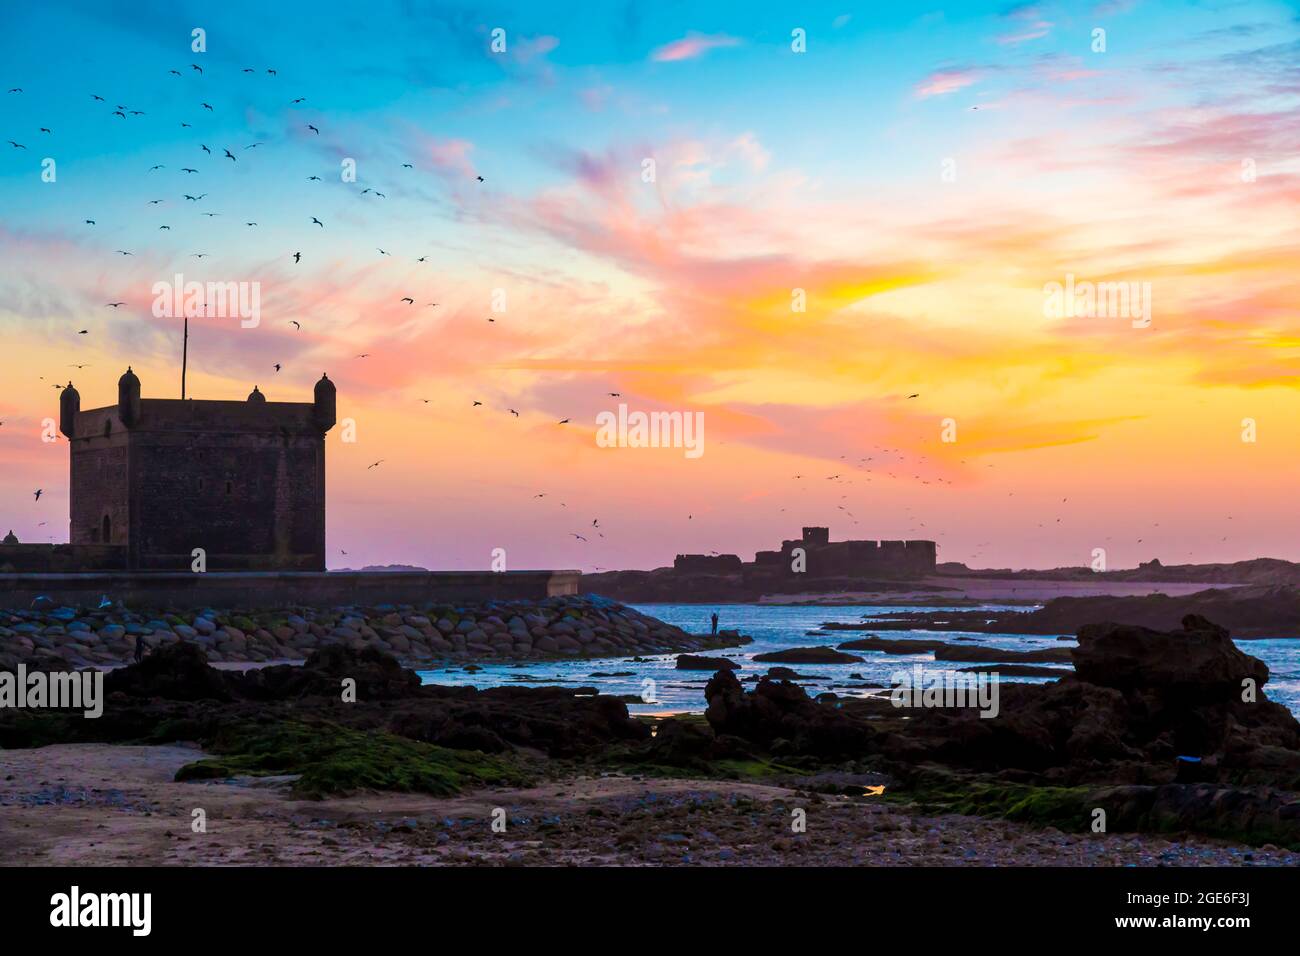 Morocco, Essaouira: sunset over the “Sqala de la Kasbah”, one of the fortifications of the city walls on the Atlantic coast, North Africa Stock Photo